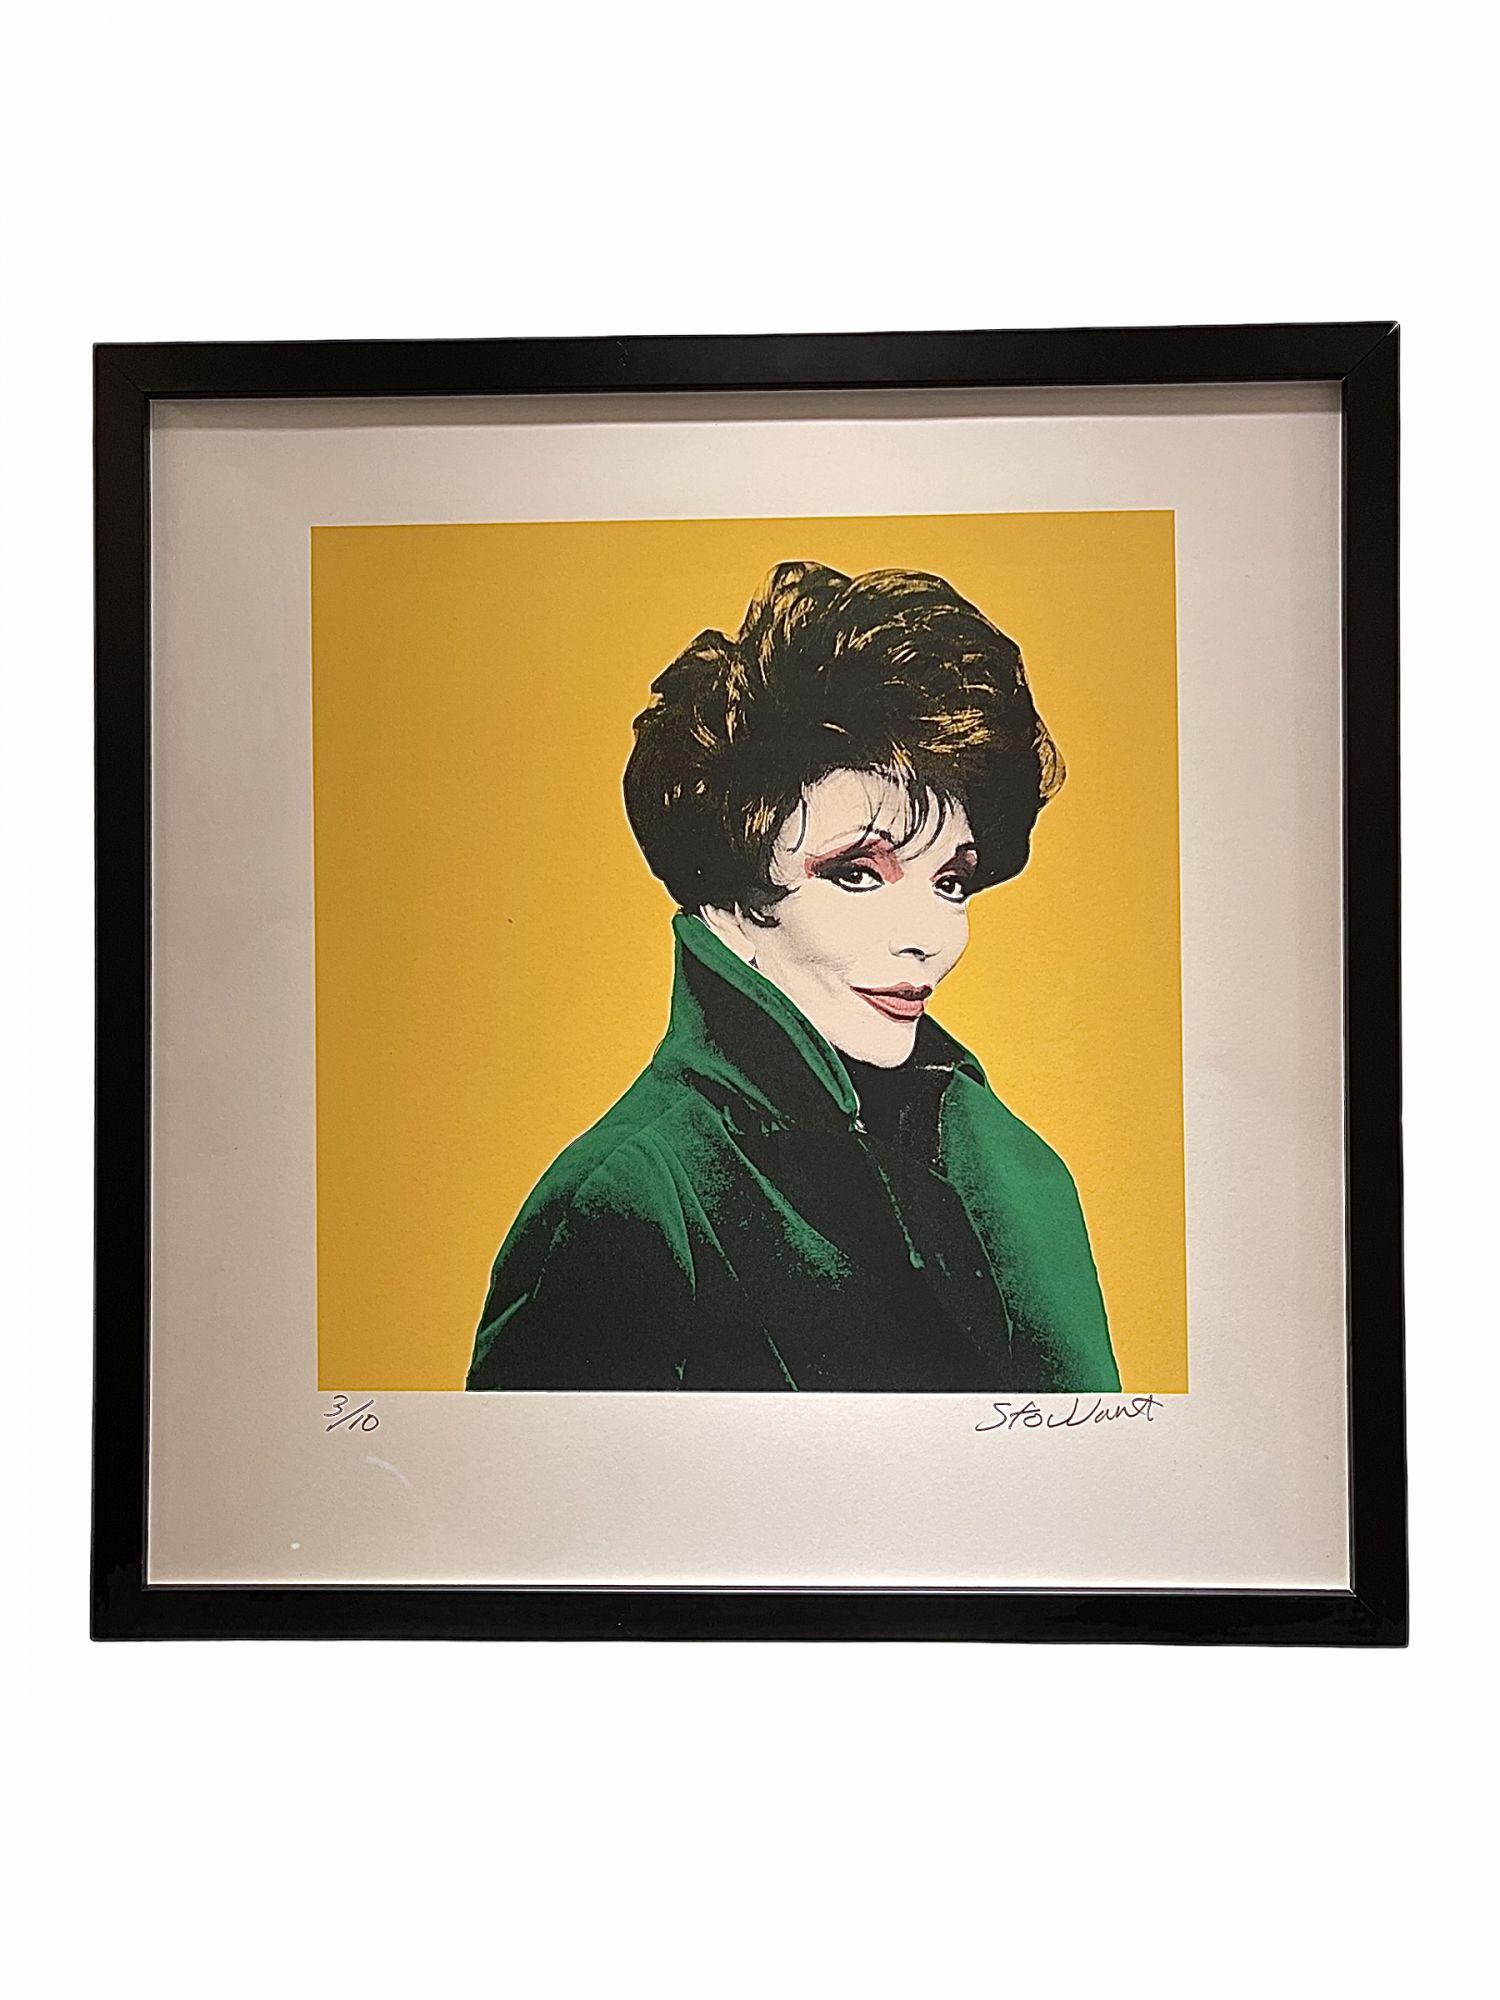 Famous! Ten silkscreen prints by John Stoddart, all taken from his photographs, a homage to Andy Warhol. And also a question, and that is, if he were alive today, would he have made portraits of the 'stars' that Stoddart photographed? Included in